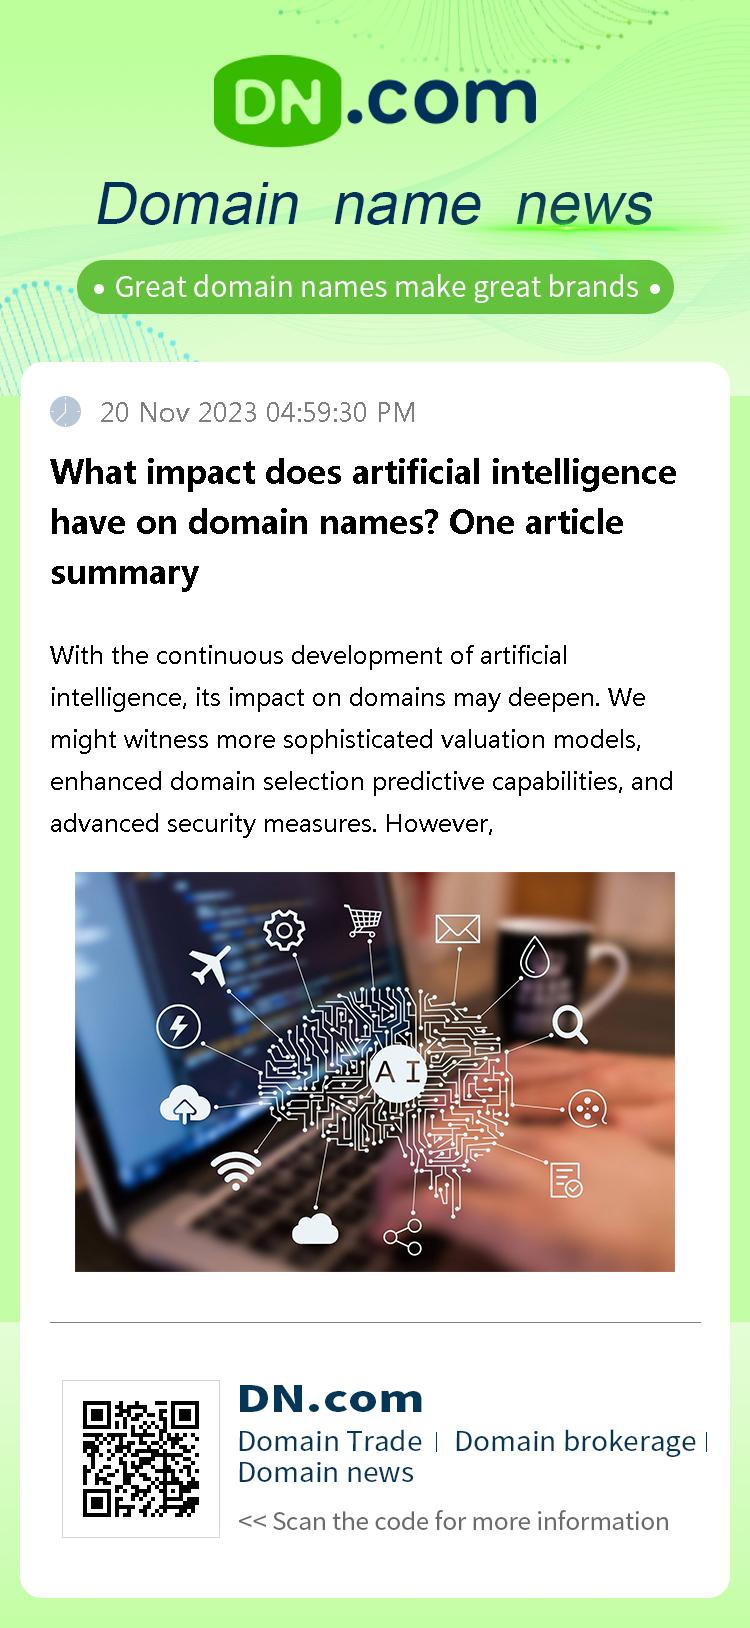 What impact does artificial intelligence have on domain names? One article summary